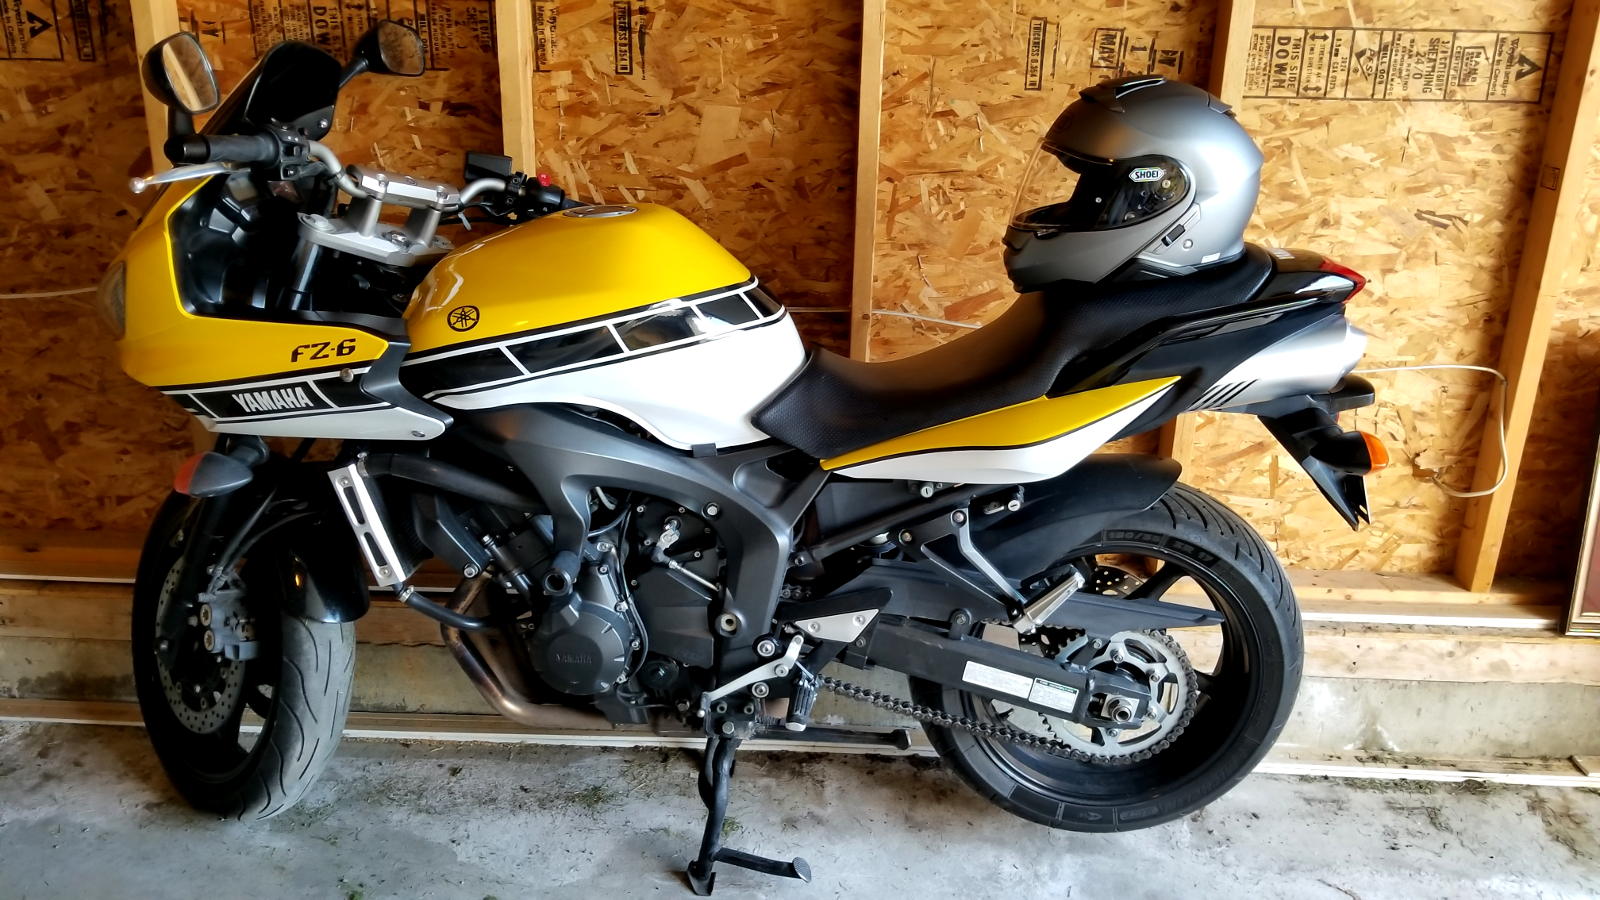 2007 Yamaha FZX6 on its Center Stand